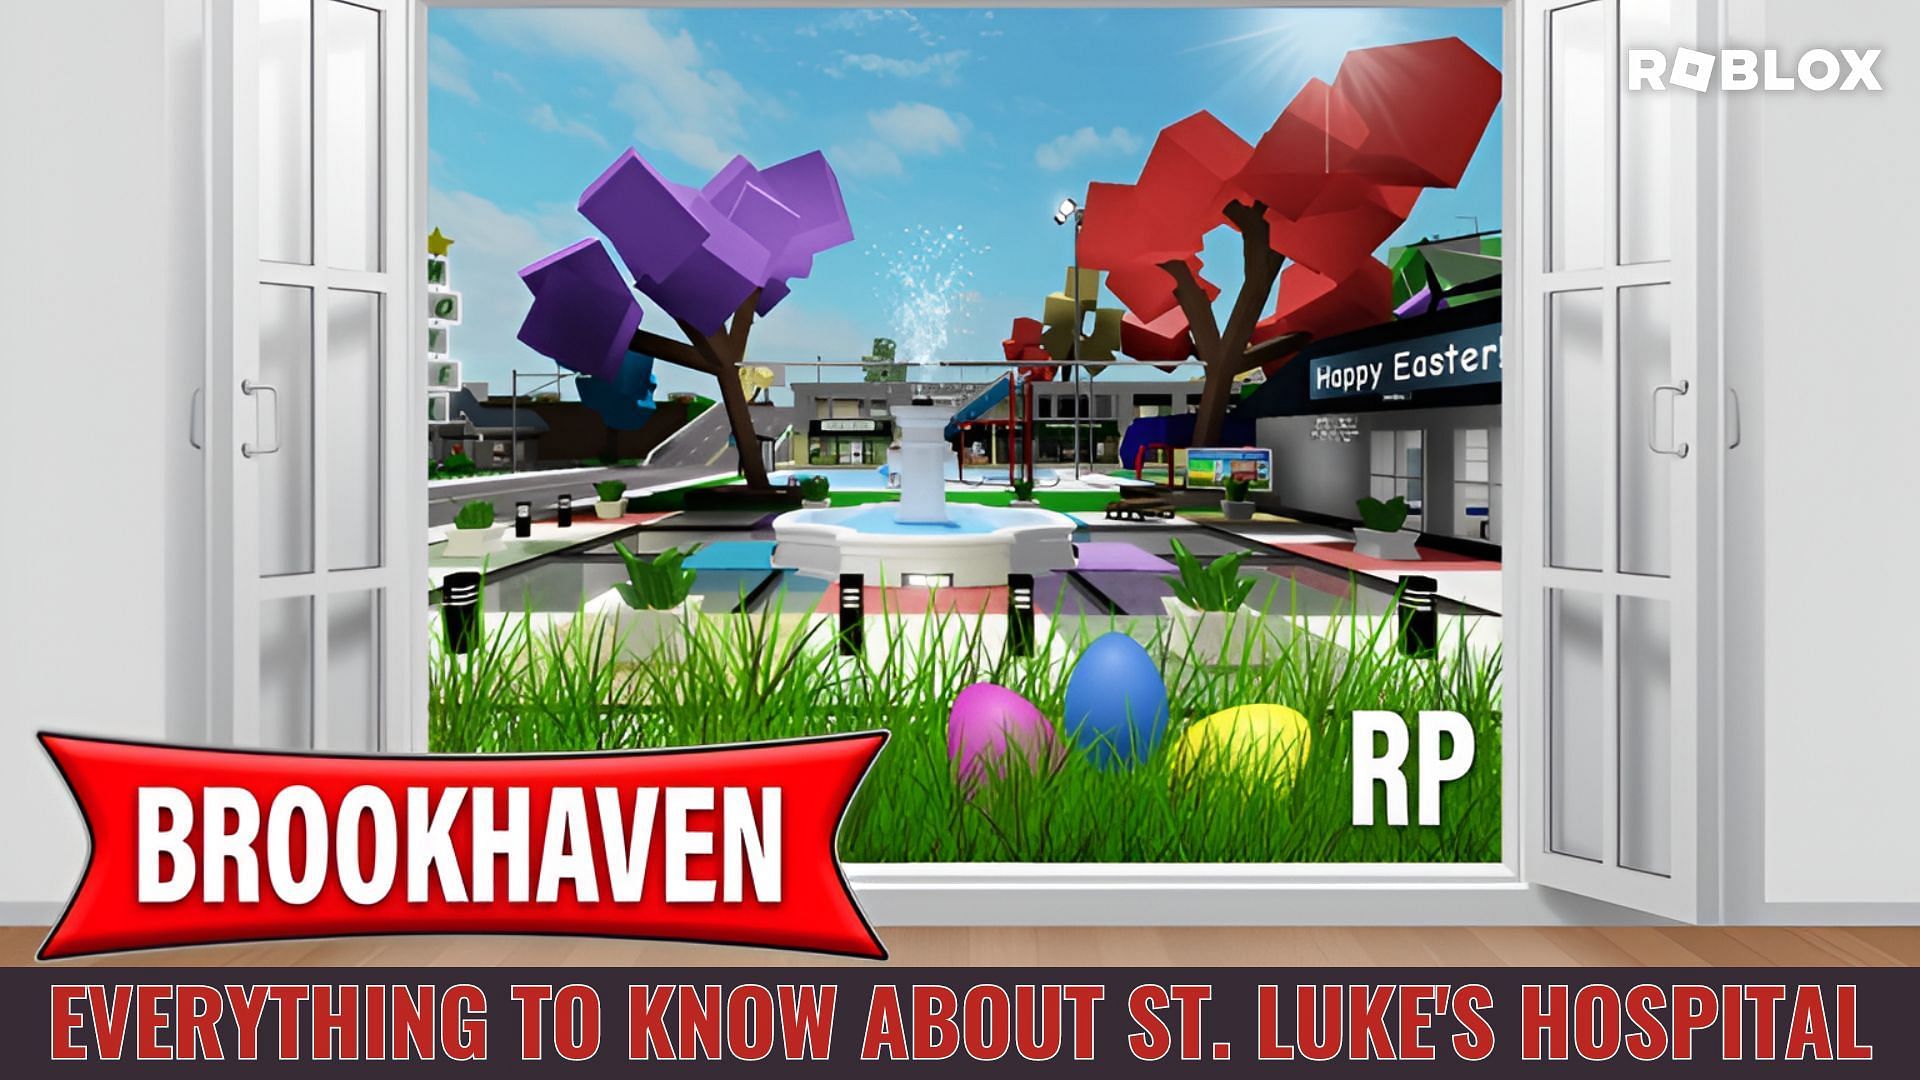 St. Luke's Hospital in Roblox Brookhaven RP: Departments, uses, and more